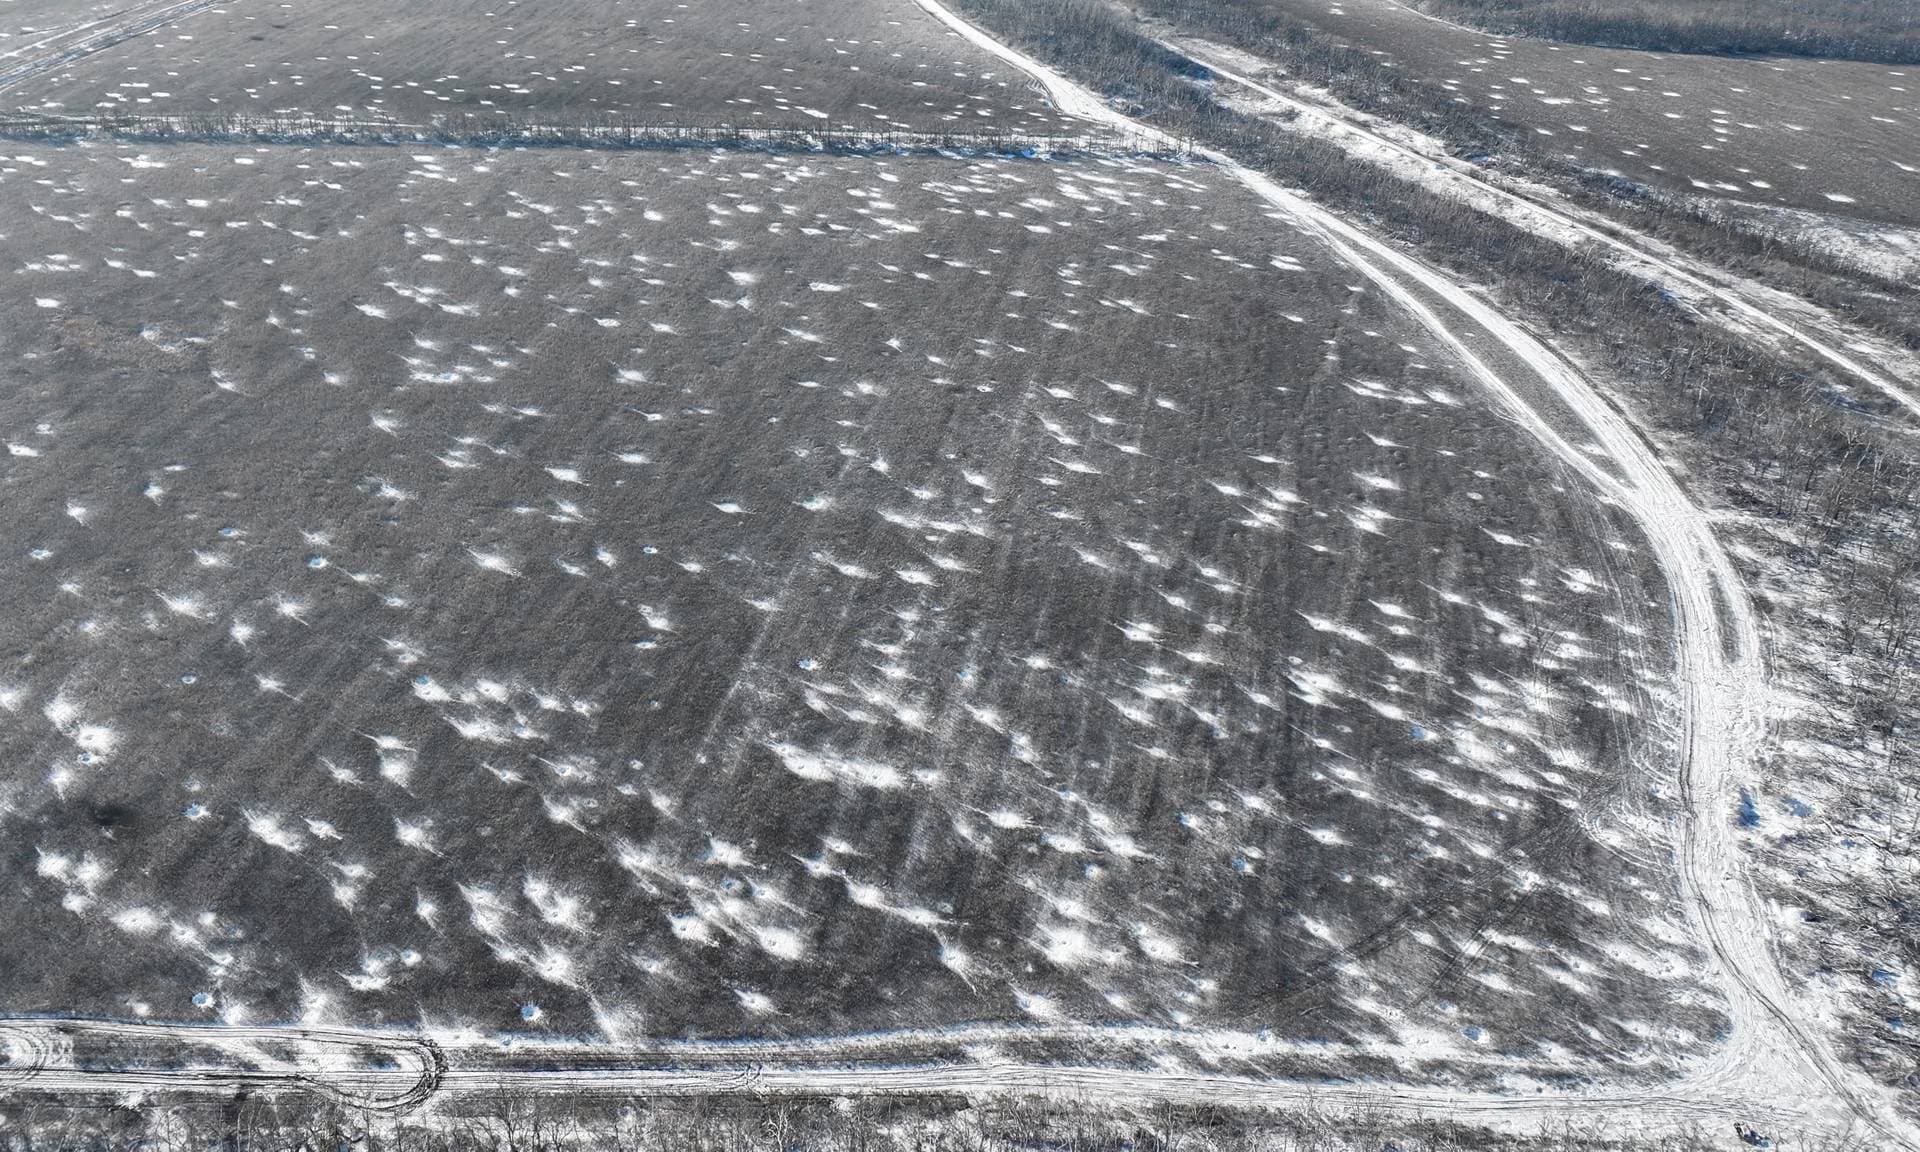 Snow-filled artillery shell craters on the frontline near Bakhmut